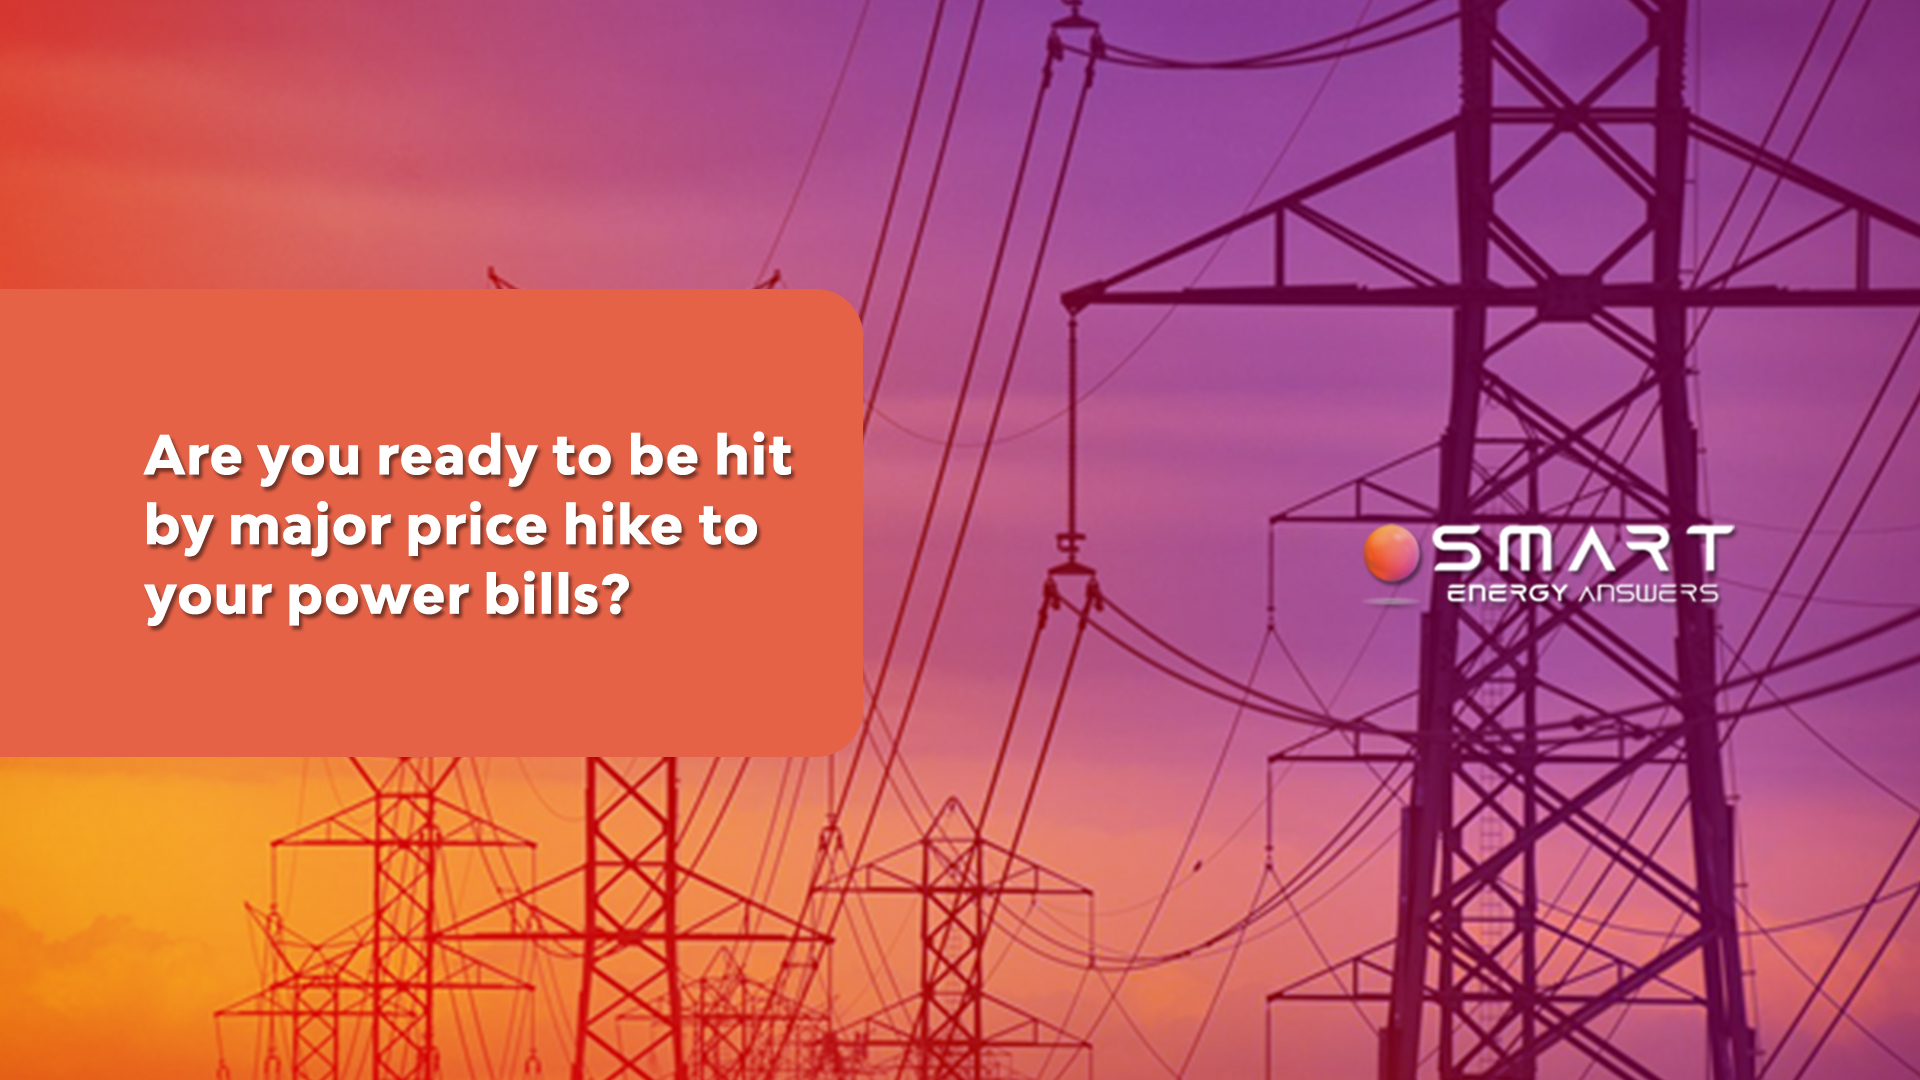 Prepare for a Major Power Bill Price Hike: What You Need to Know - featured image